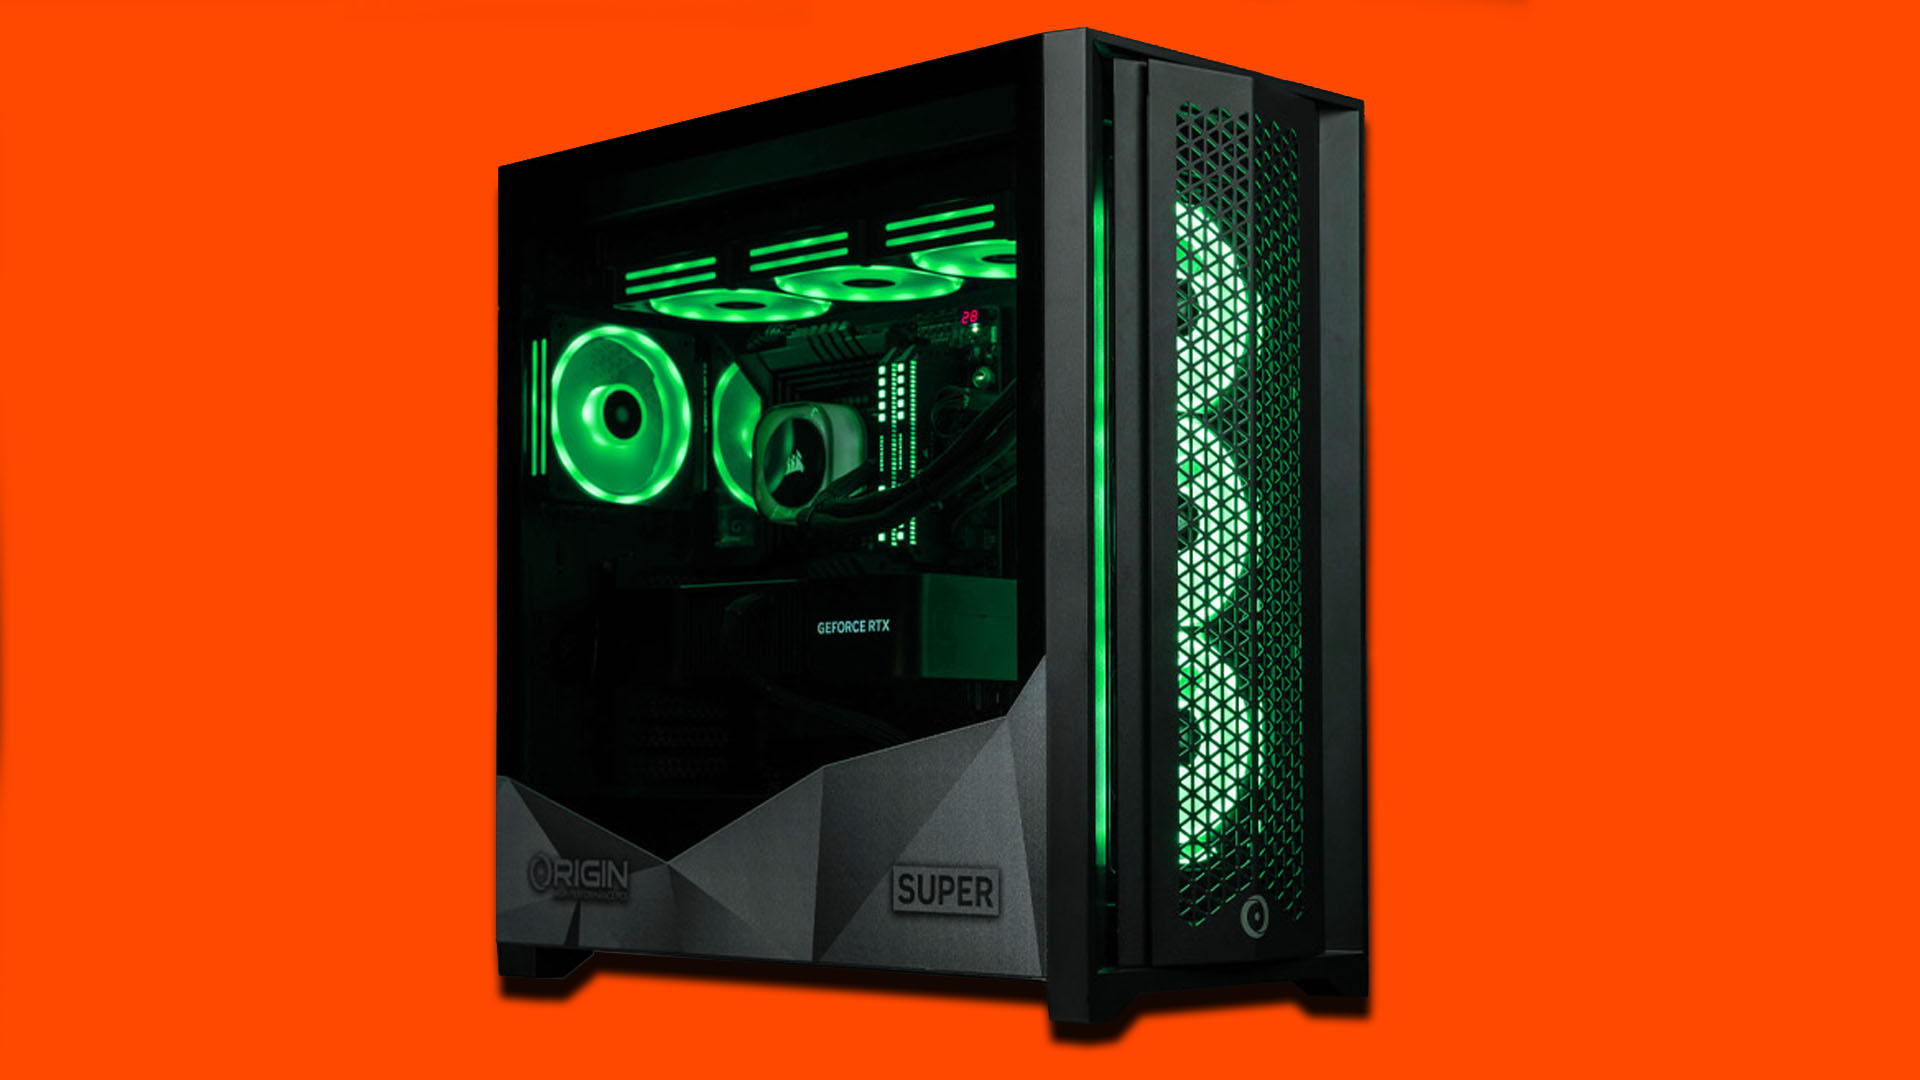 Win an RTX 4080 Super PC in this worldwide Nvidia giveaway